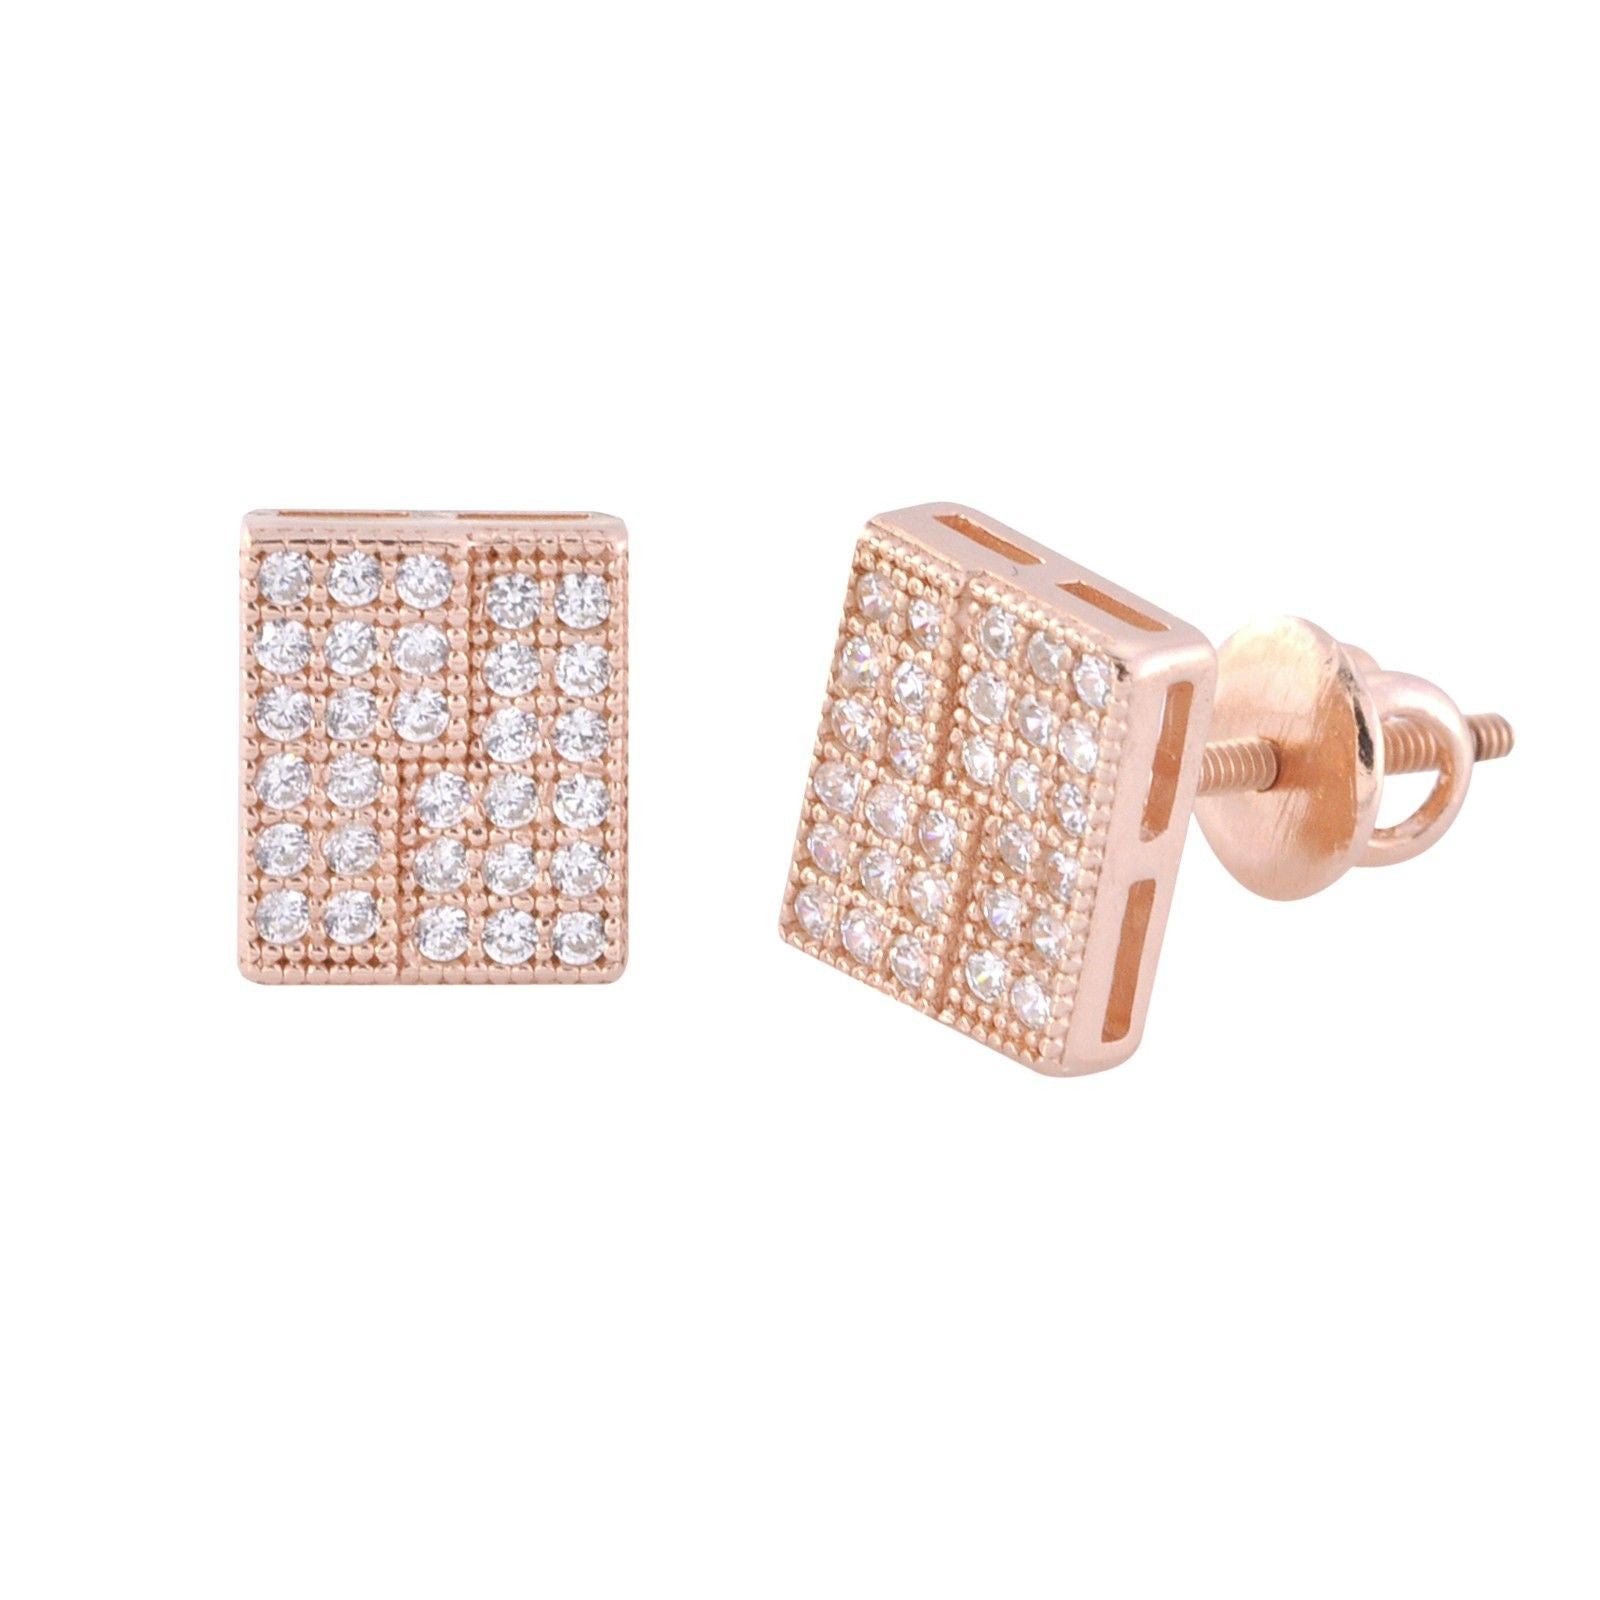 Screwback Earrings Sterling Silver Studs Rose Gold Plated CZ Rectangle ...